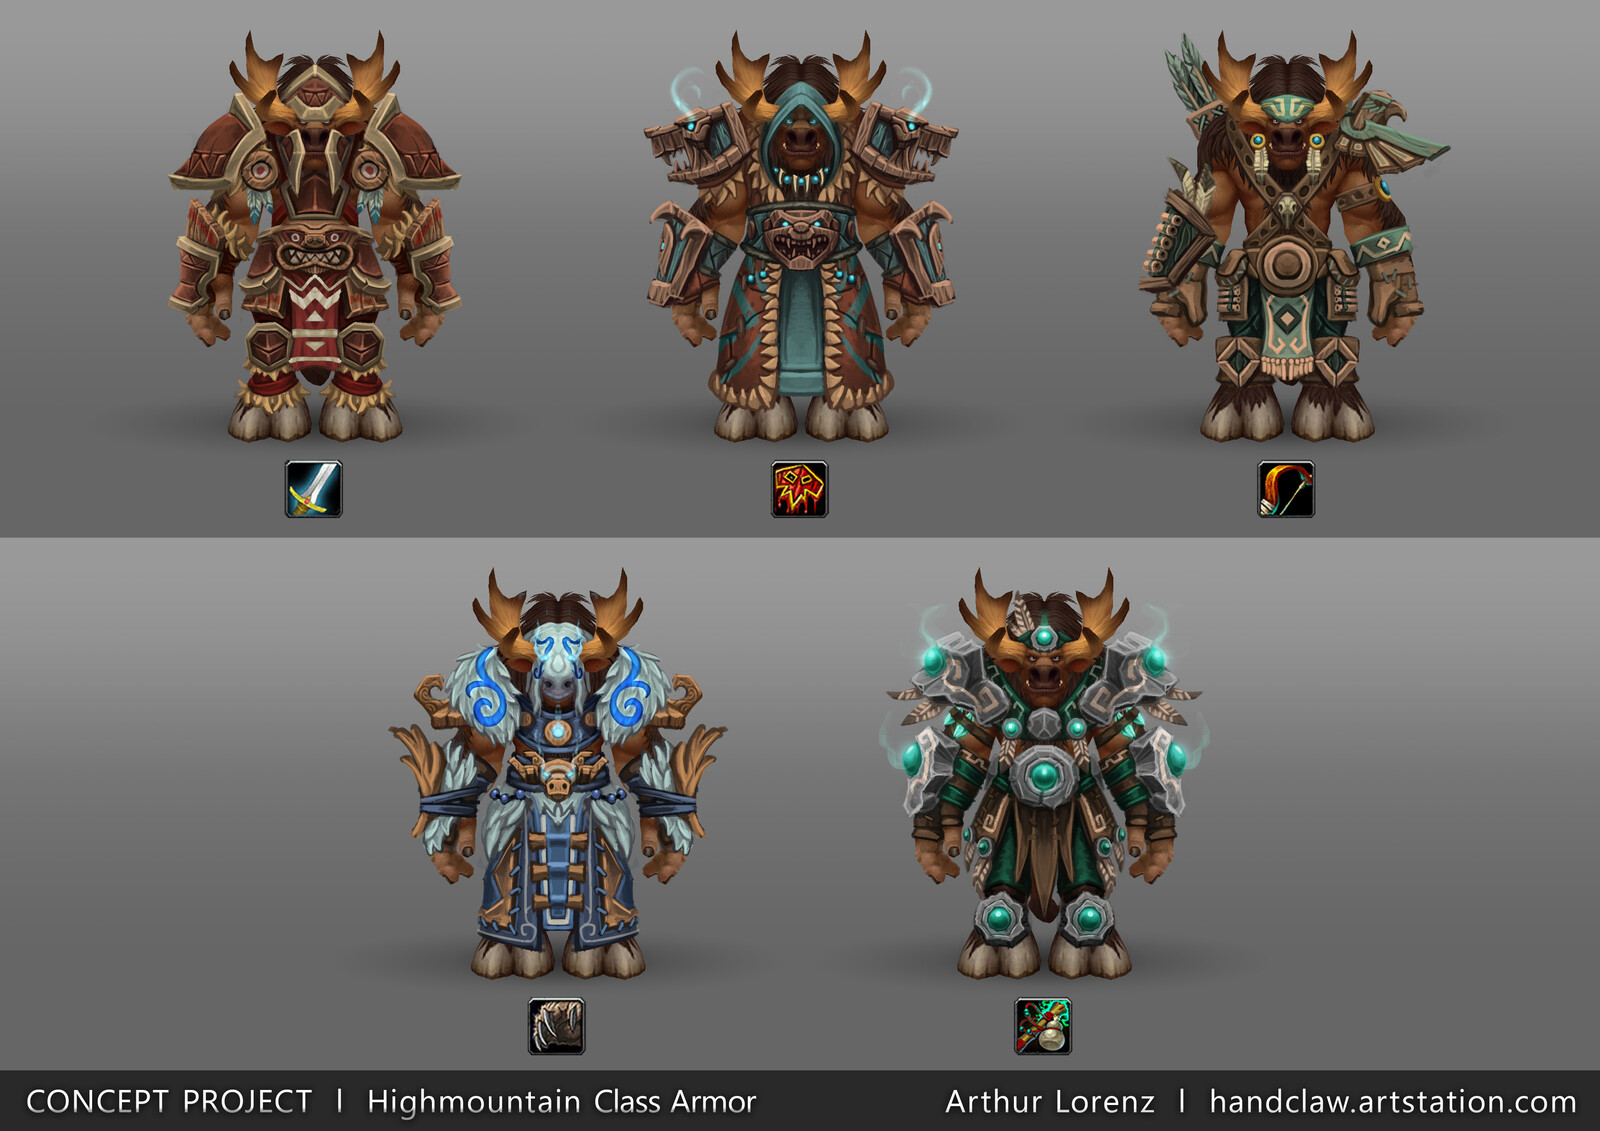 Overview

In comparision to the Thunderbluff Tauren, I decided to not use Totems as part of the design. That is due to various totems being available either trough the heritage armor or useable items from a vendor in their capital city.